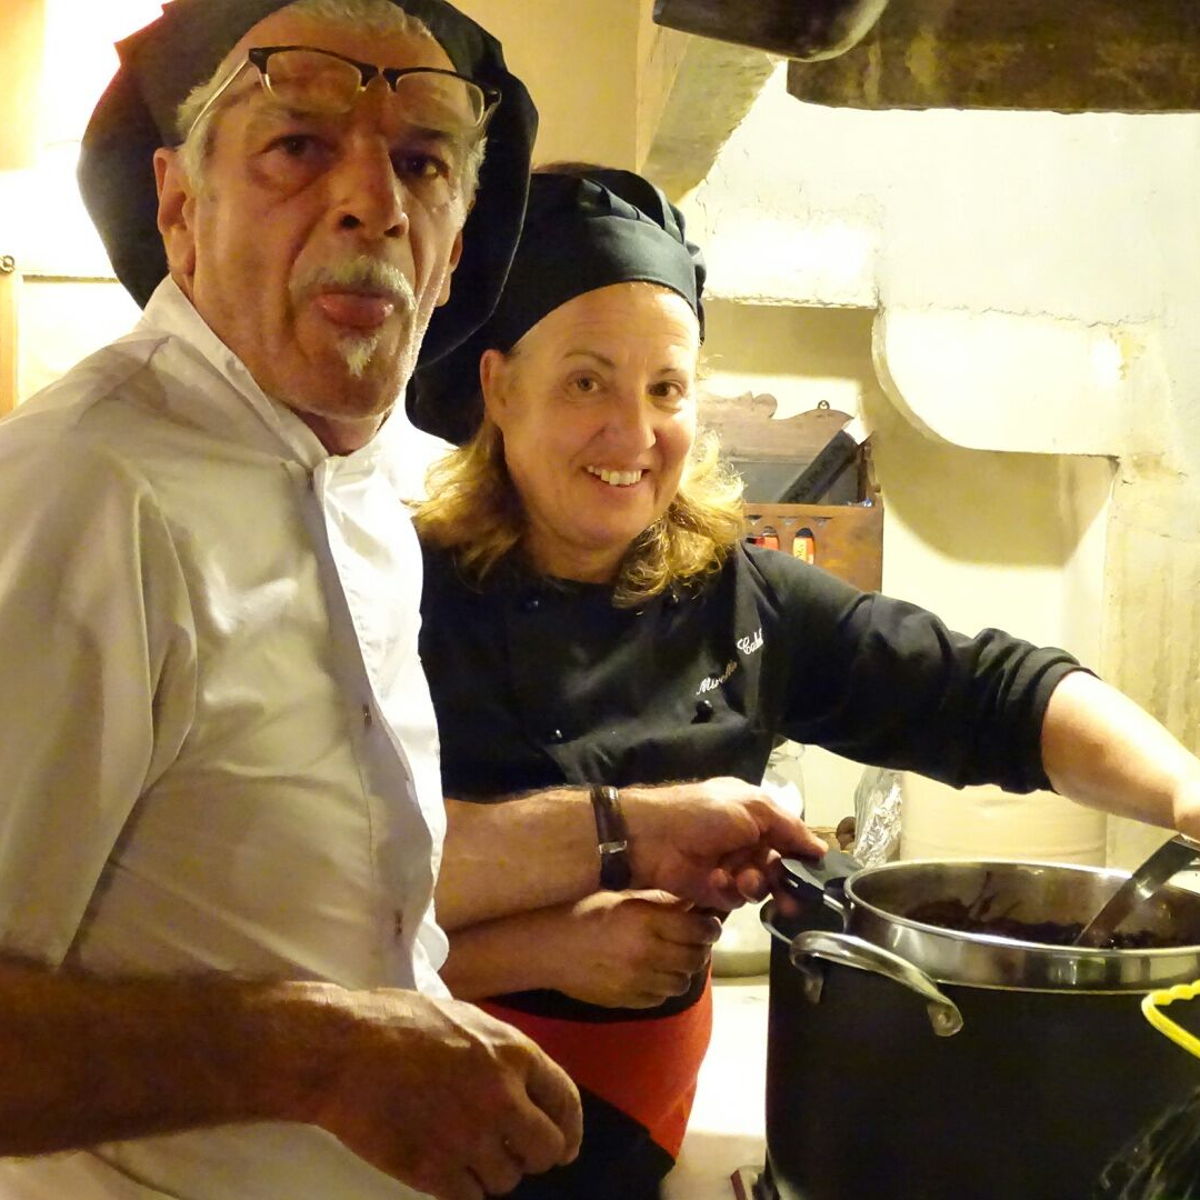 Preparing classical Florentine dishes with local professional chefs